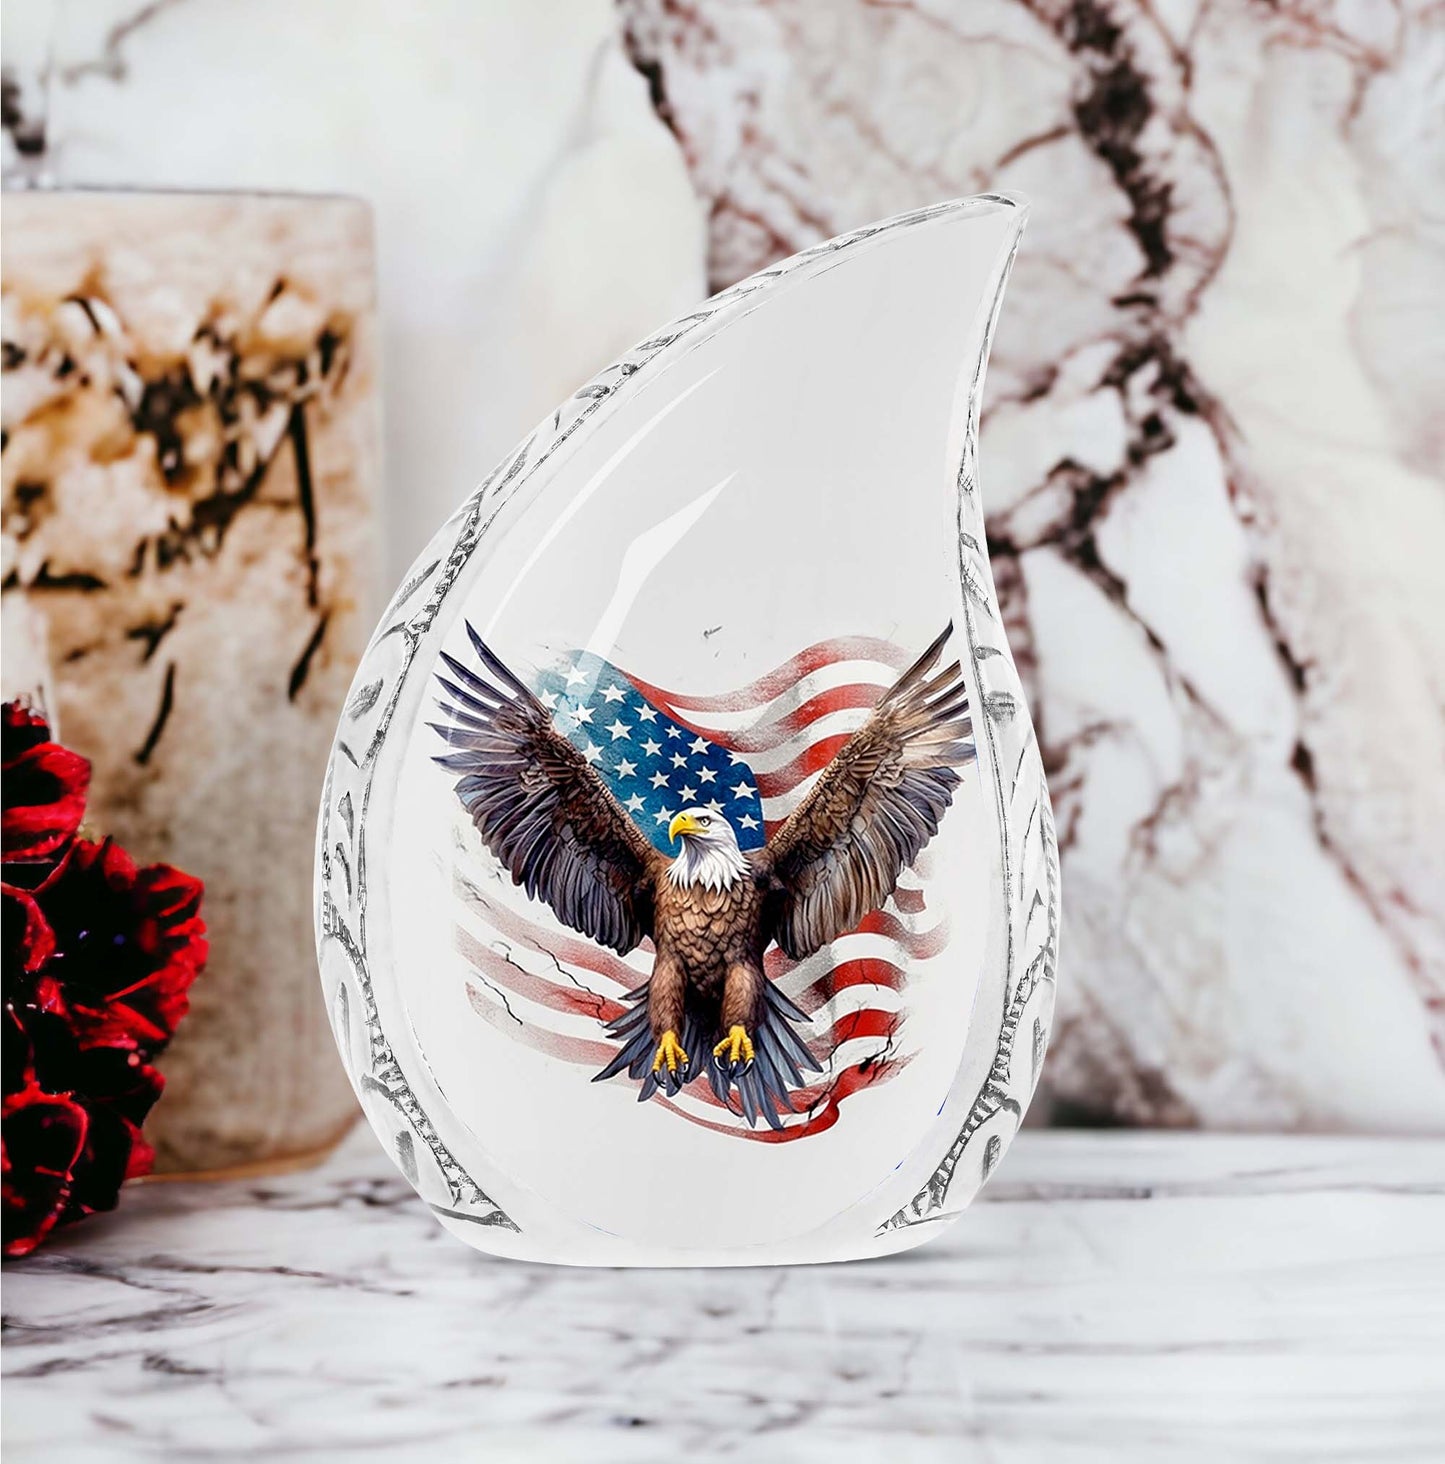 Elegant American flag-themed cremation urn featuring an eagle, suitable for adults' ashes